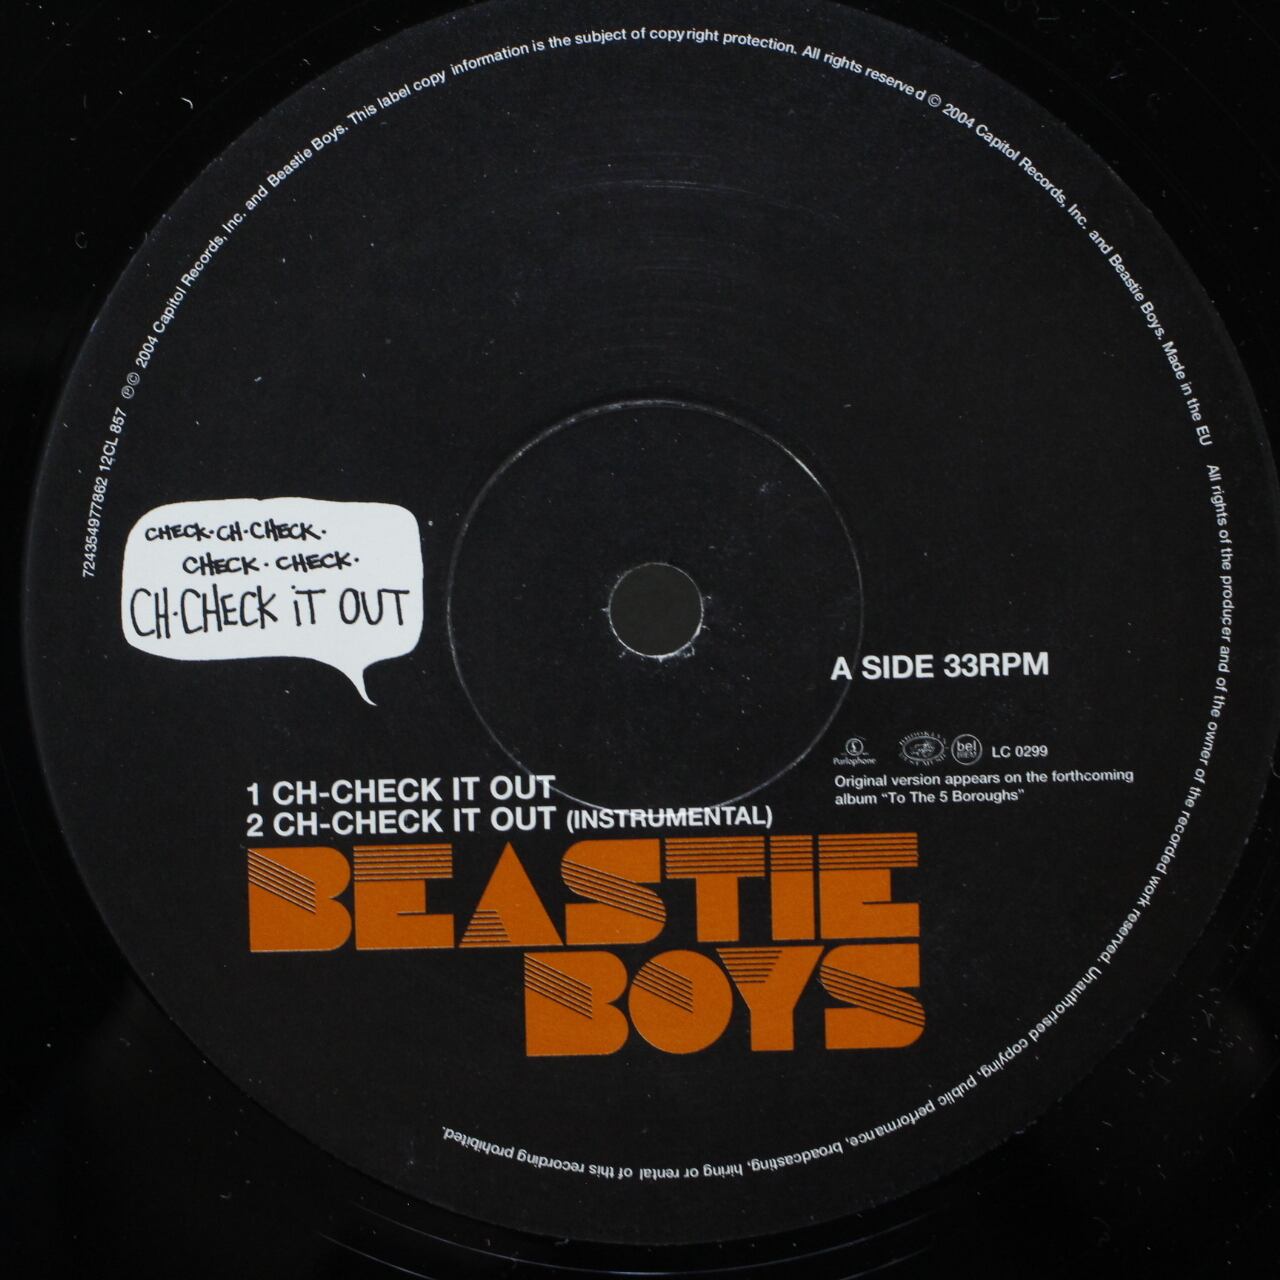 Beastie Boys / Ch-Check It Out [12CL 857, 724354977862] - 画像3